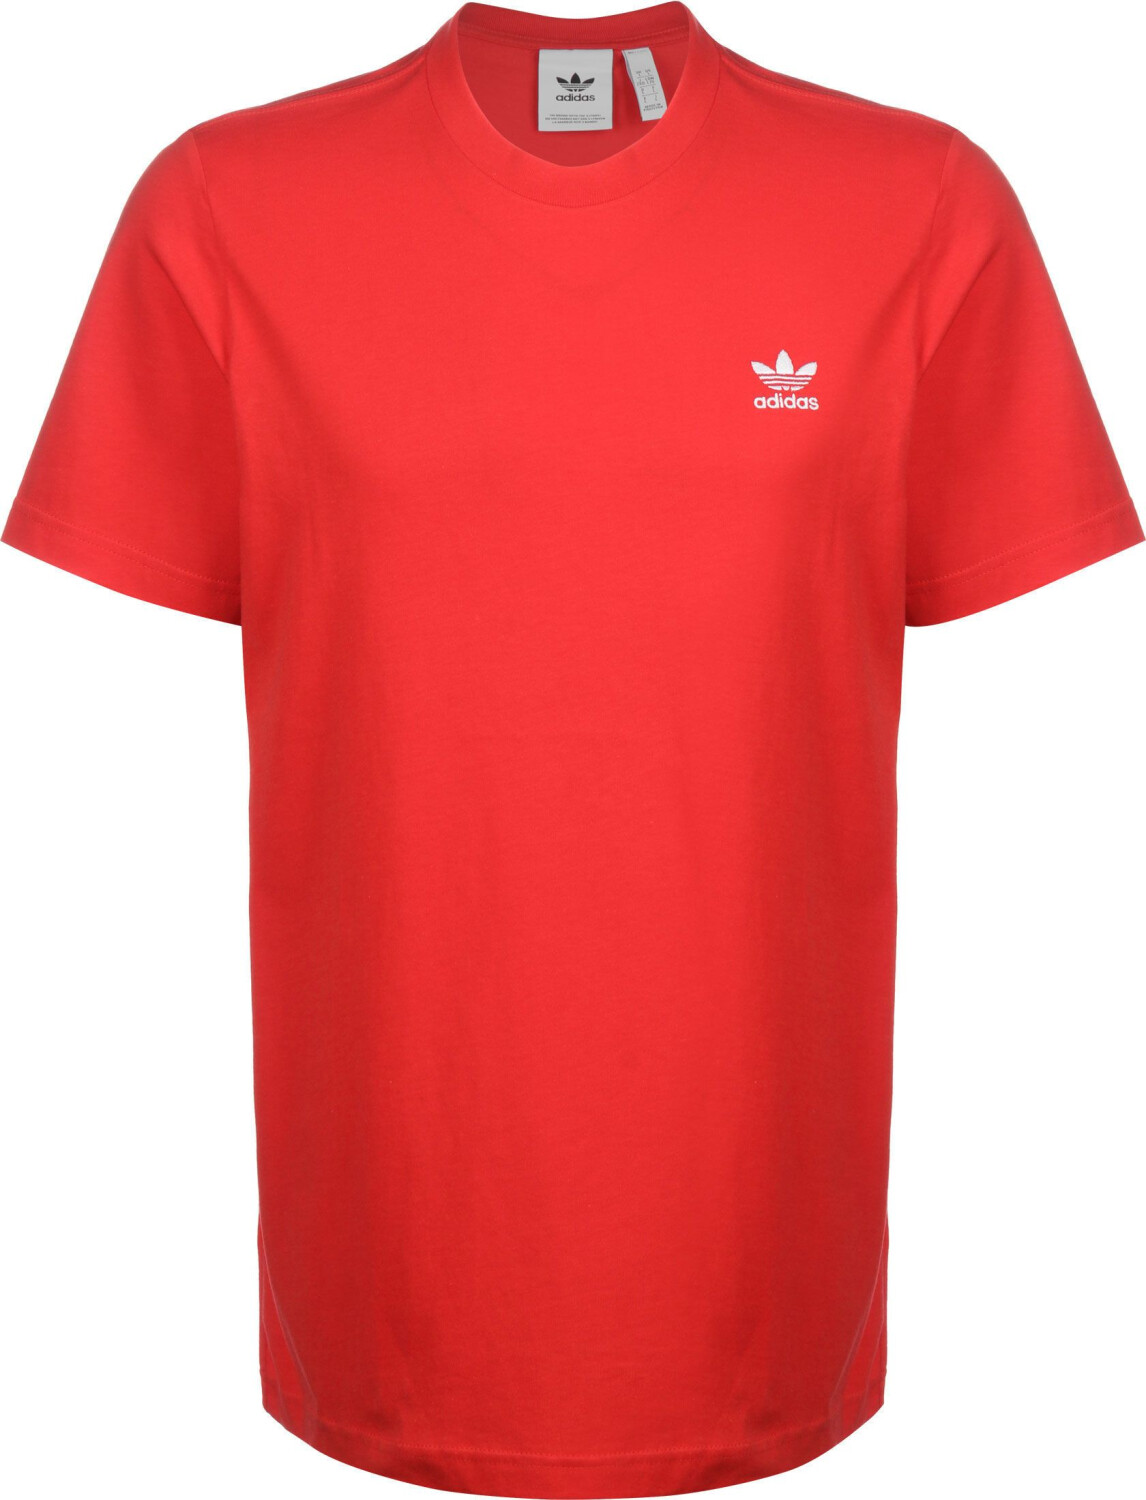 on T-Shirt Best – Deals Buy Adidas £9.99 (Today) Essentials from Trefoil